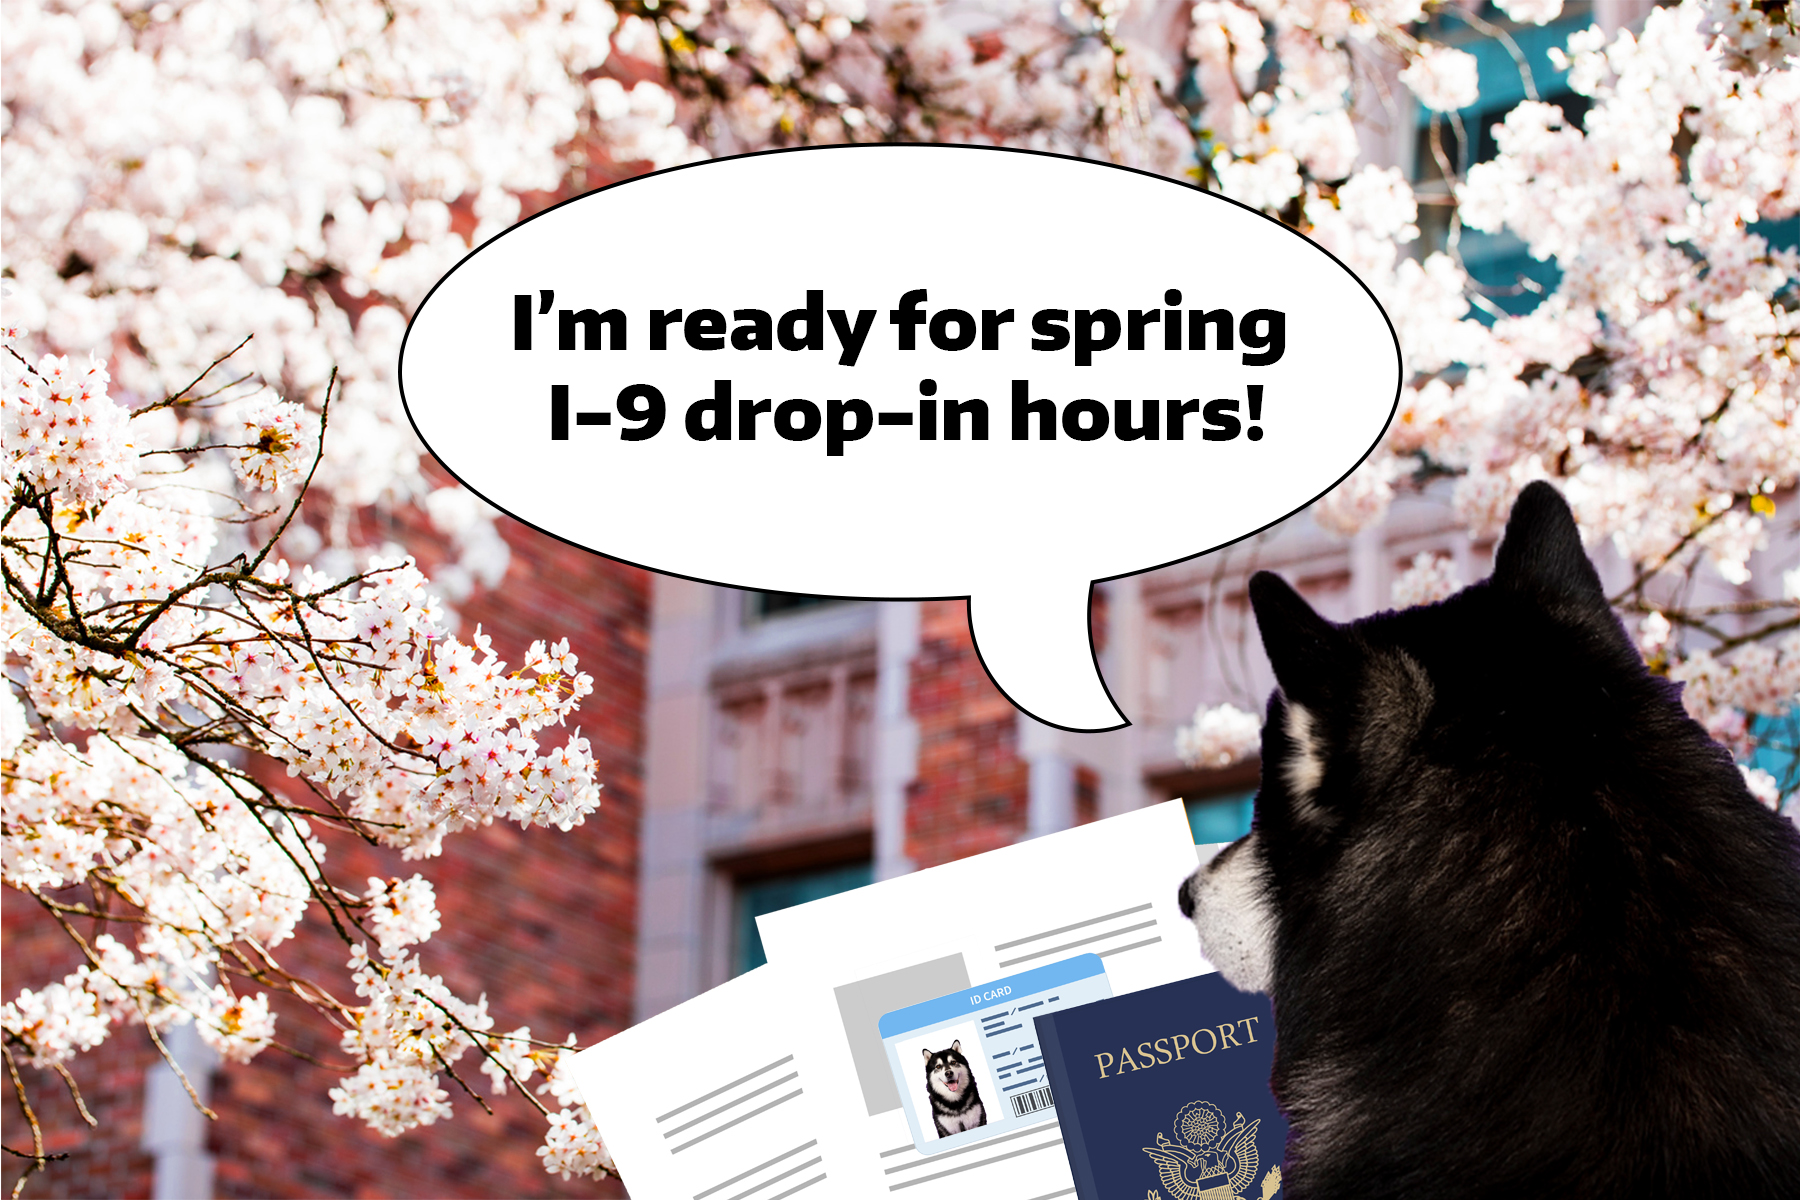 Dubs with their I-9 documents saying, "I'm ready for spring I-9 drop-in hours!"